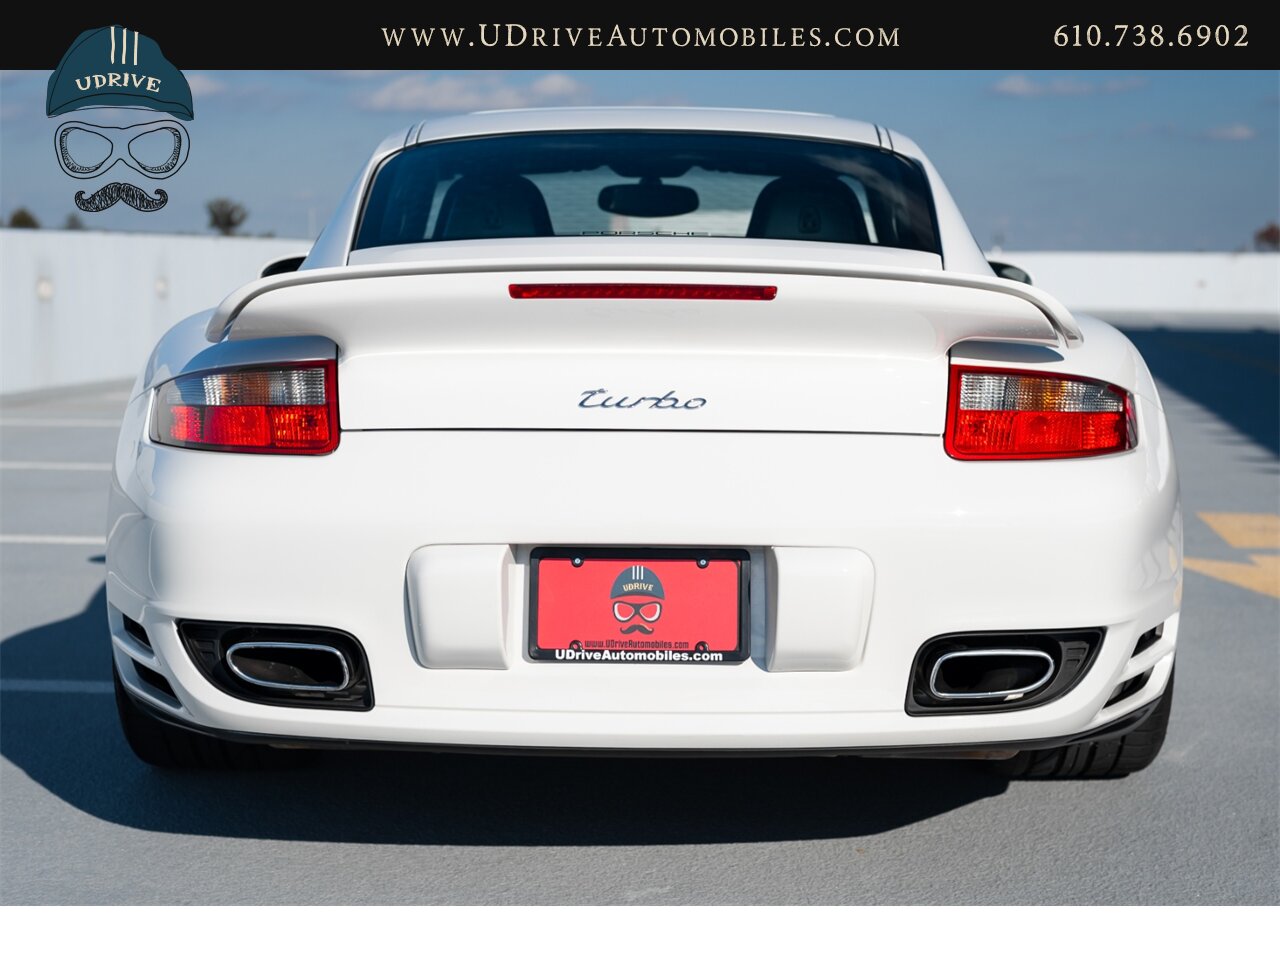 2007 Porsche 911 Turbo 642 Miles 1 Owner Carrara White 997  Sport Chrono Adaptive Sport Seats All Documentation from New - Photo 17 - West Chester, PA 19382